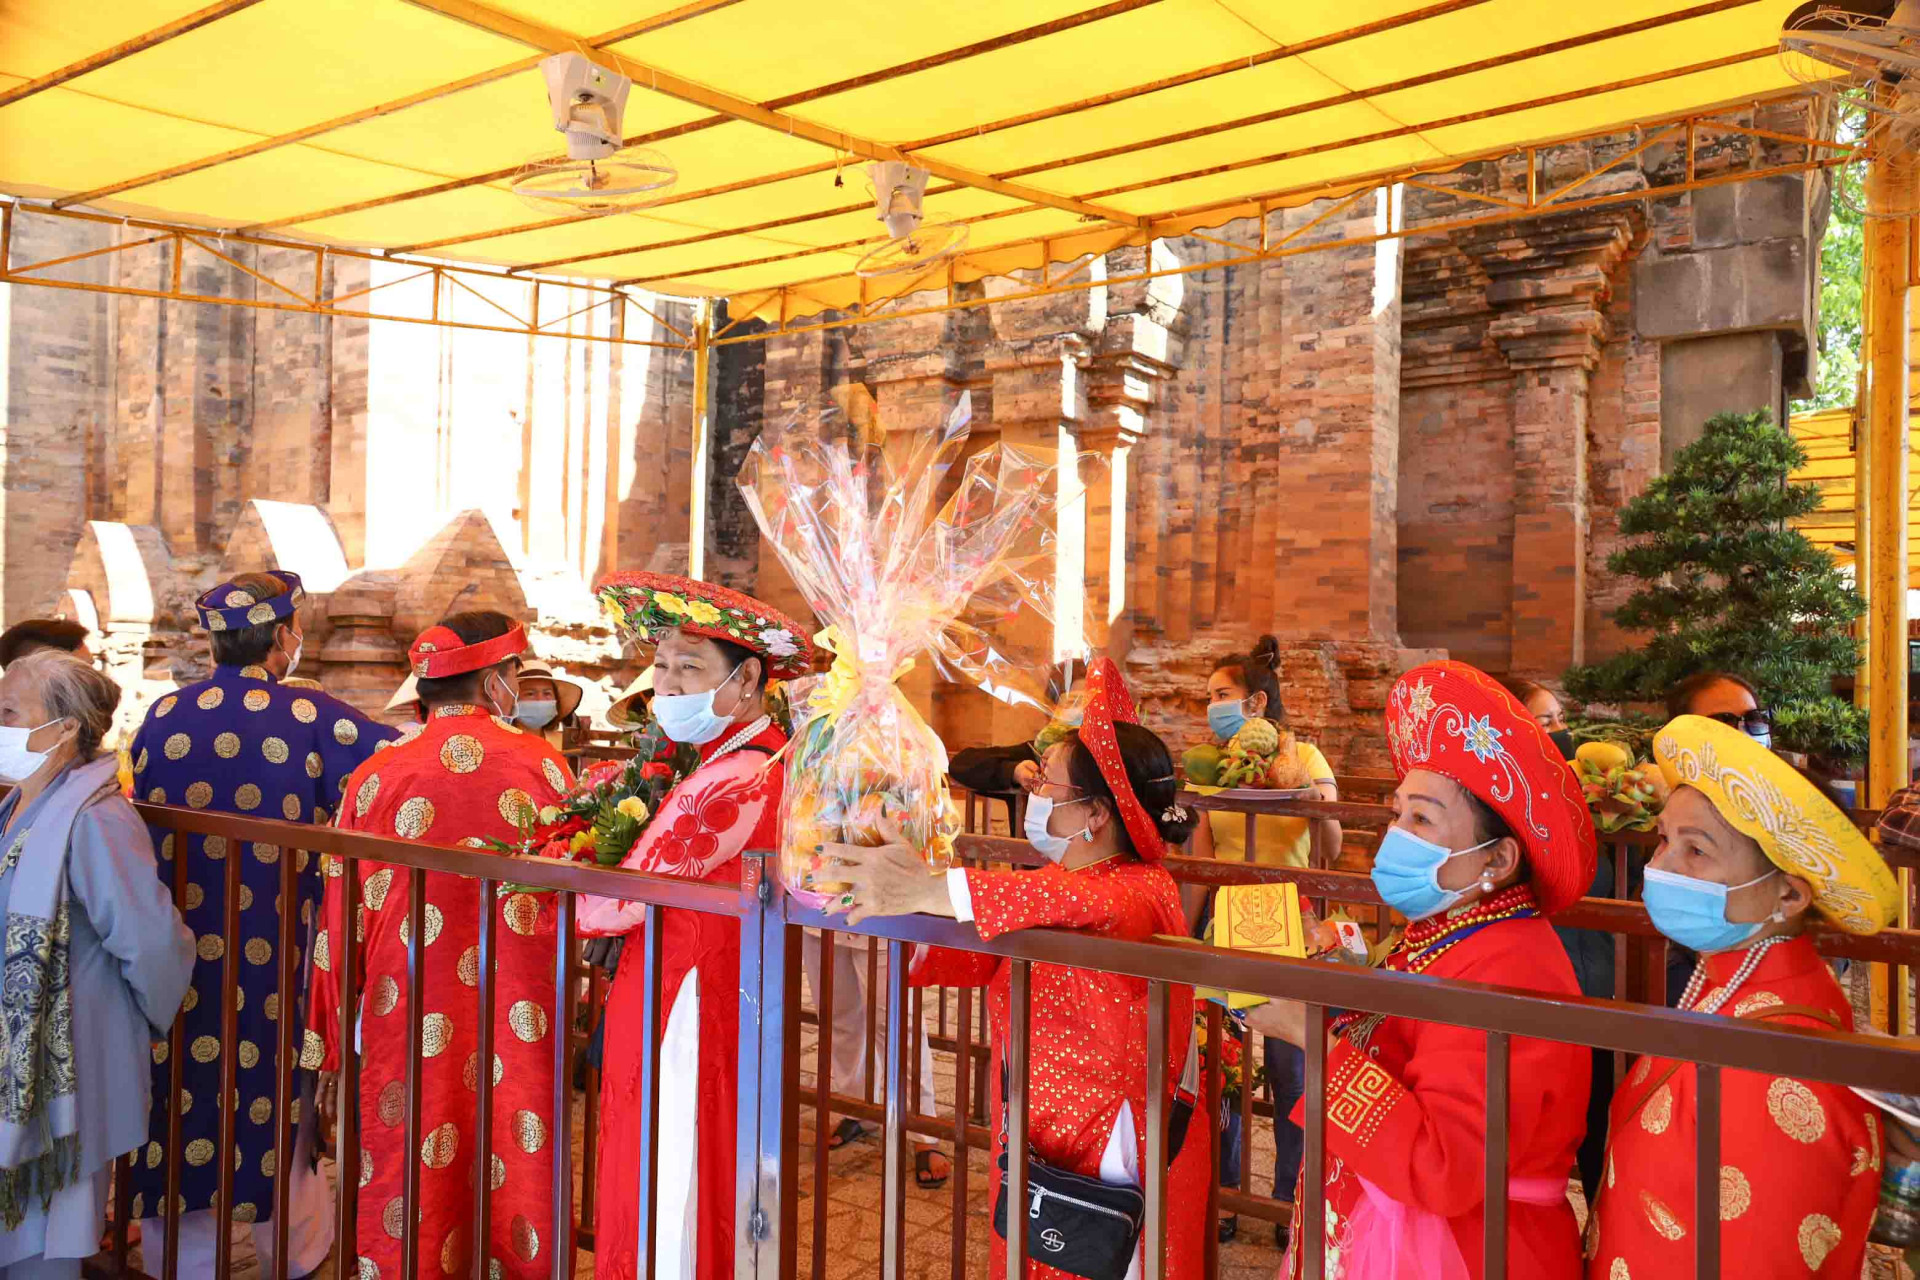 Pilgrims waiting to offer incense to the Holy Mother